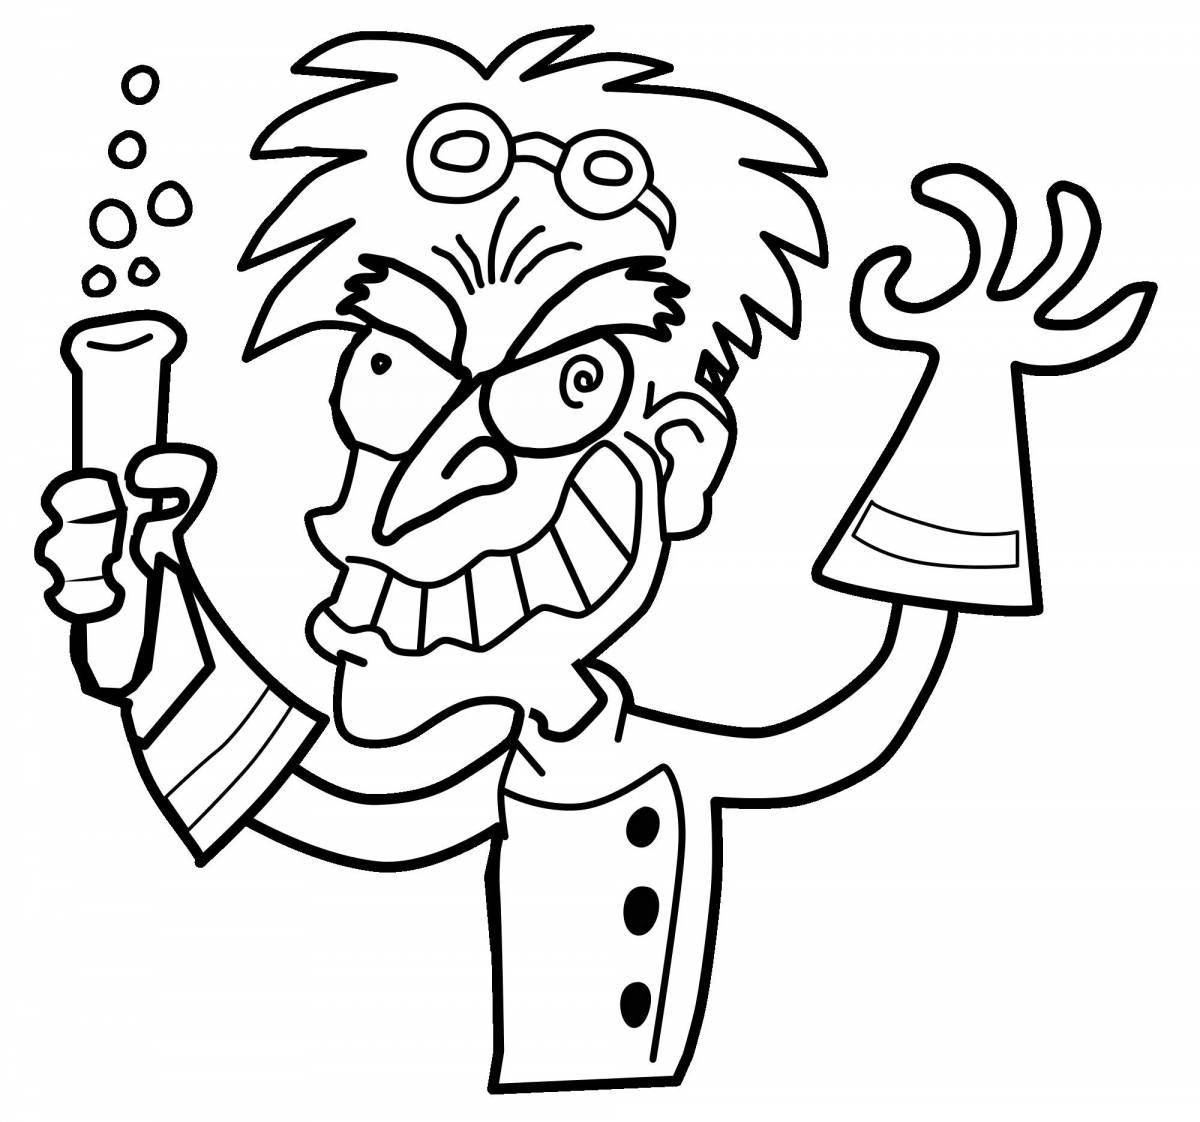 Scientists funny coloring pages for kids